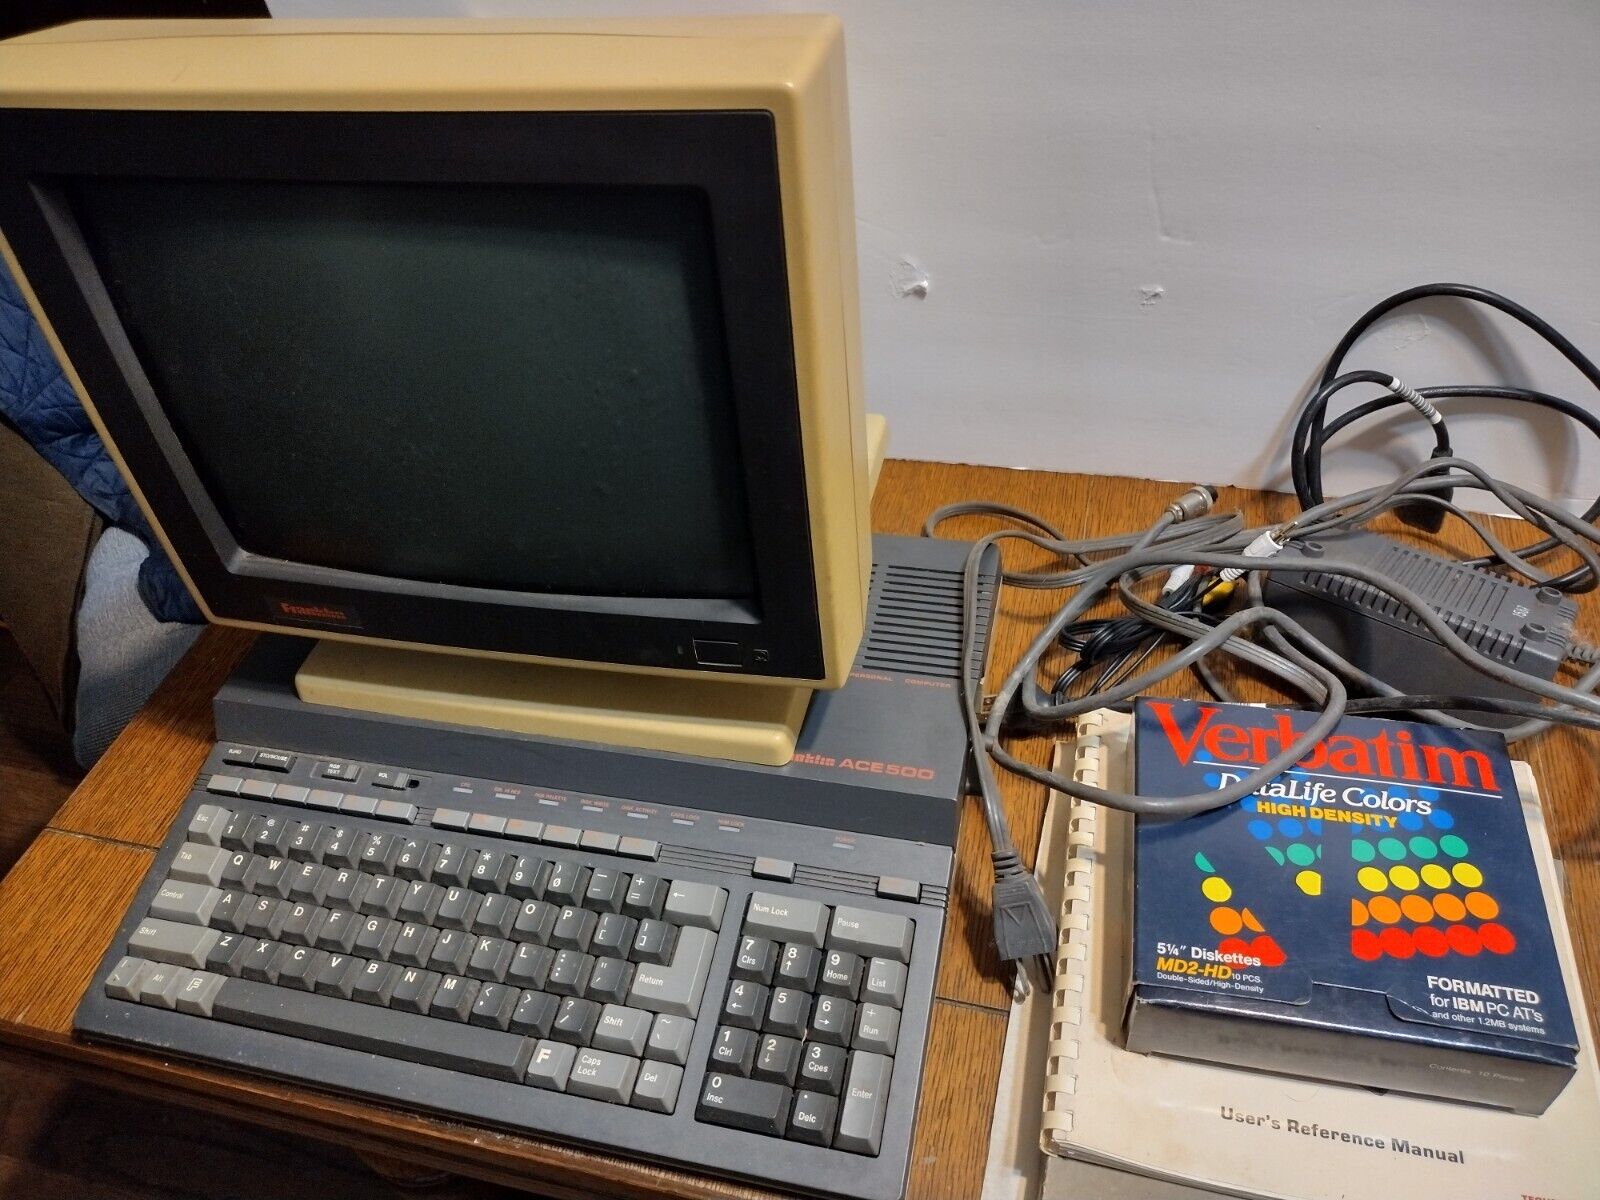 Franklin ACE 500 vintage computer with Monitor, cables and program discs